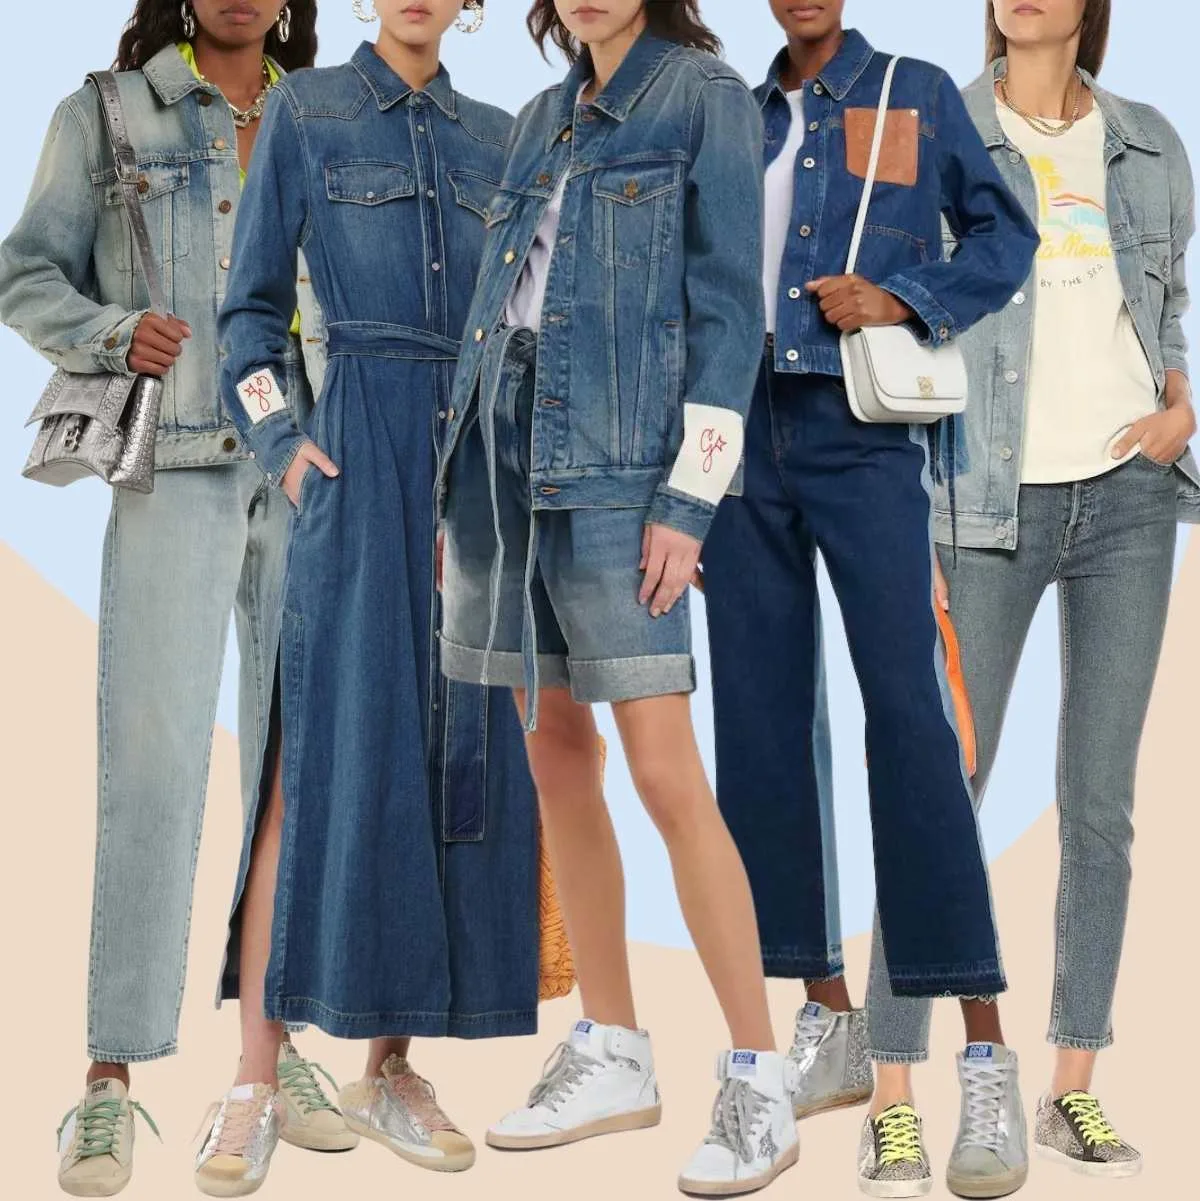 Collage of 5 women wearing different casual golden goose outfits with denim.